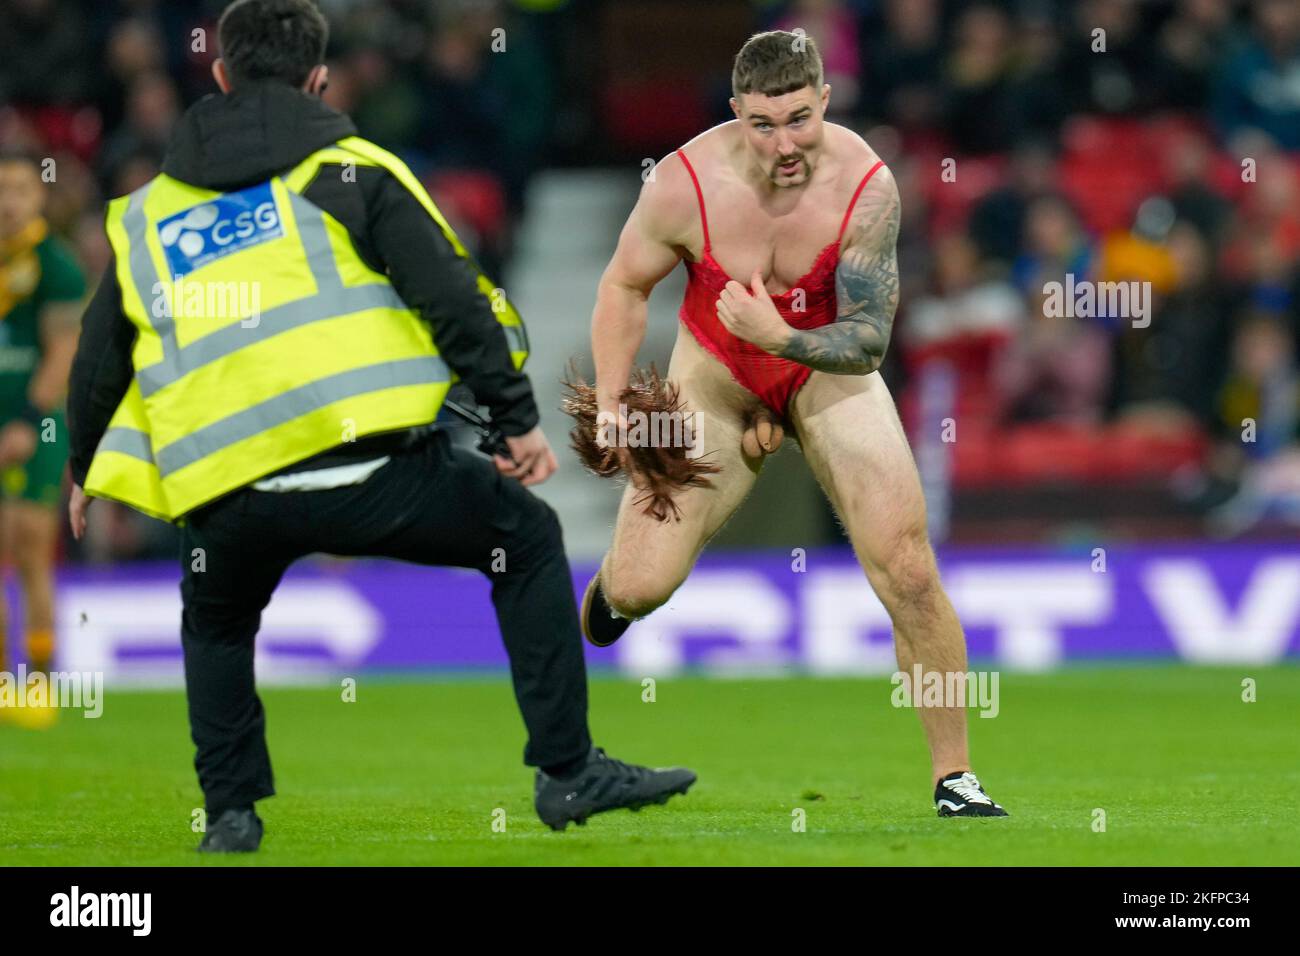 Manchester, UK. 18th Nov, 2022. A streaker during the 2021 Rugby League World Cup Final 2021 match between Australia and Samoa at Old Trafford, Manchester, England on 19 November 2022. Photo by David Horn. Credit: PRiME Media Images/Alamy Live News Stock Photo